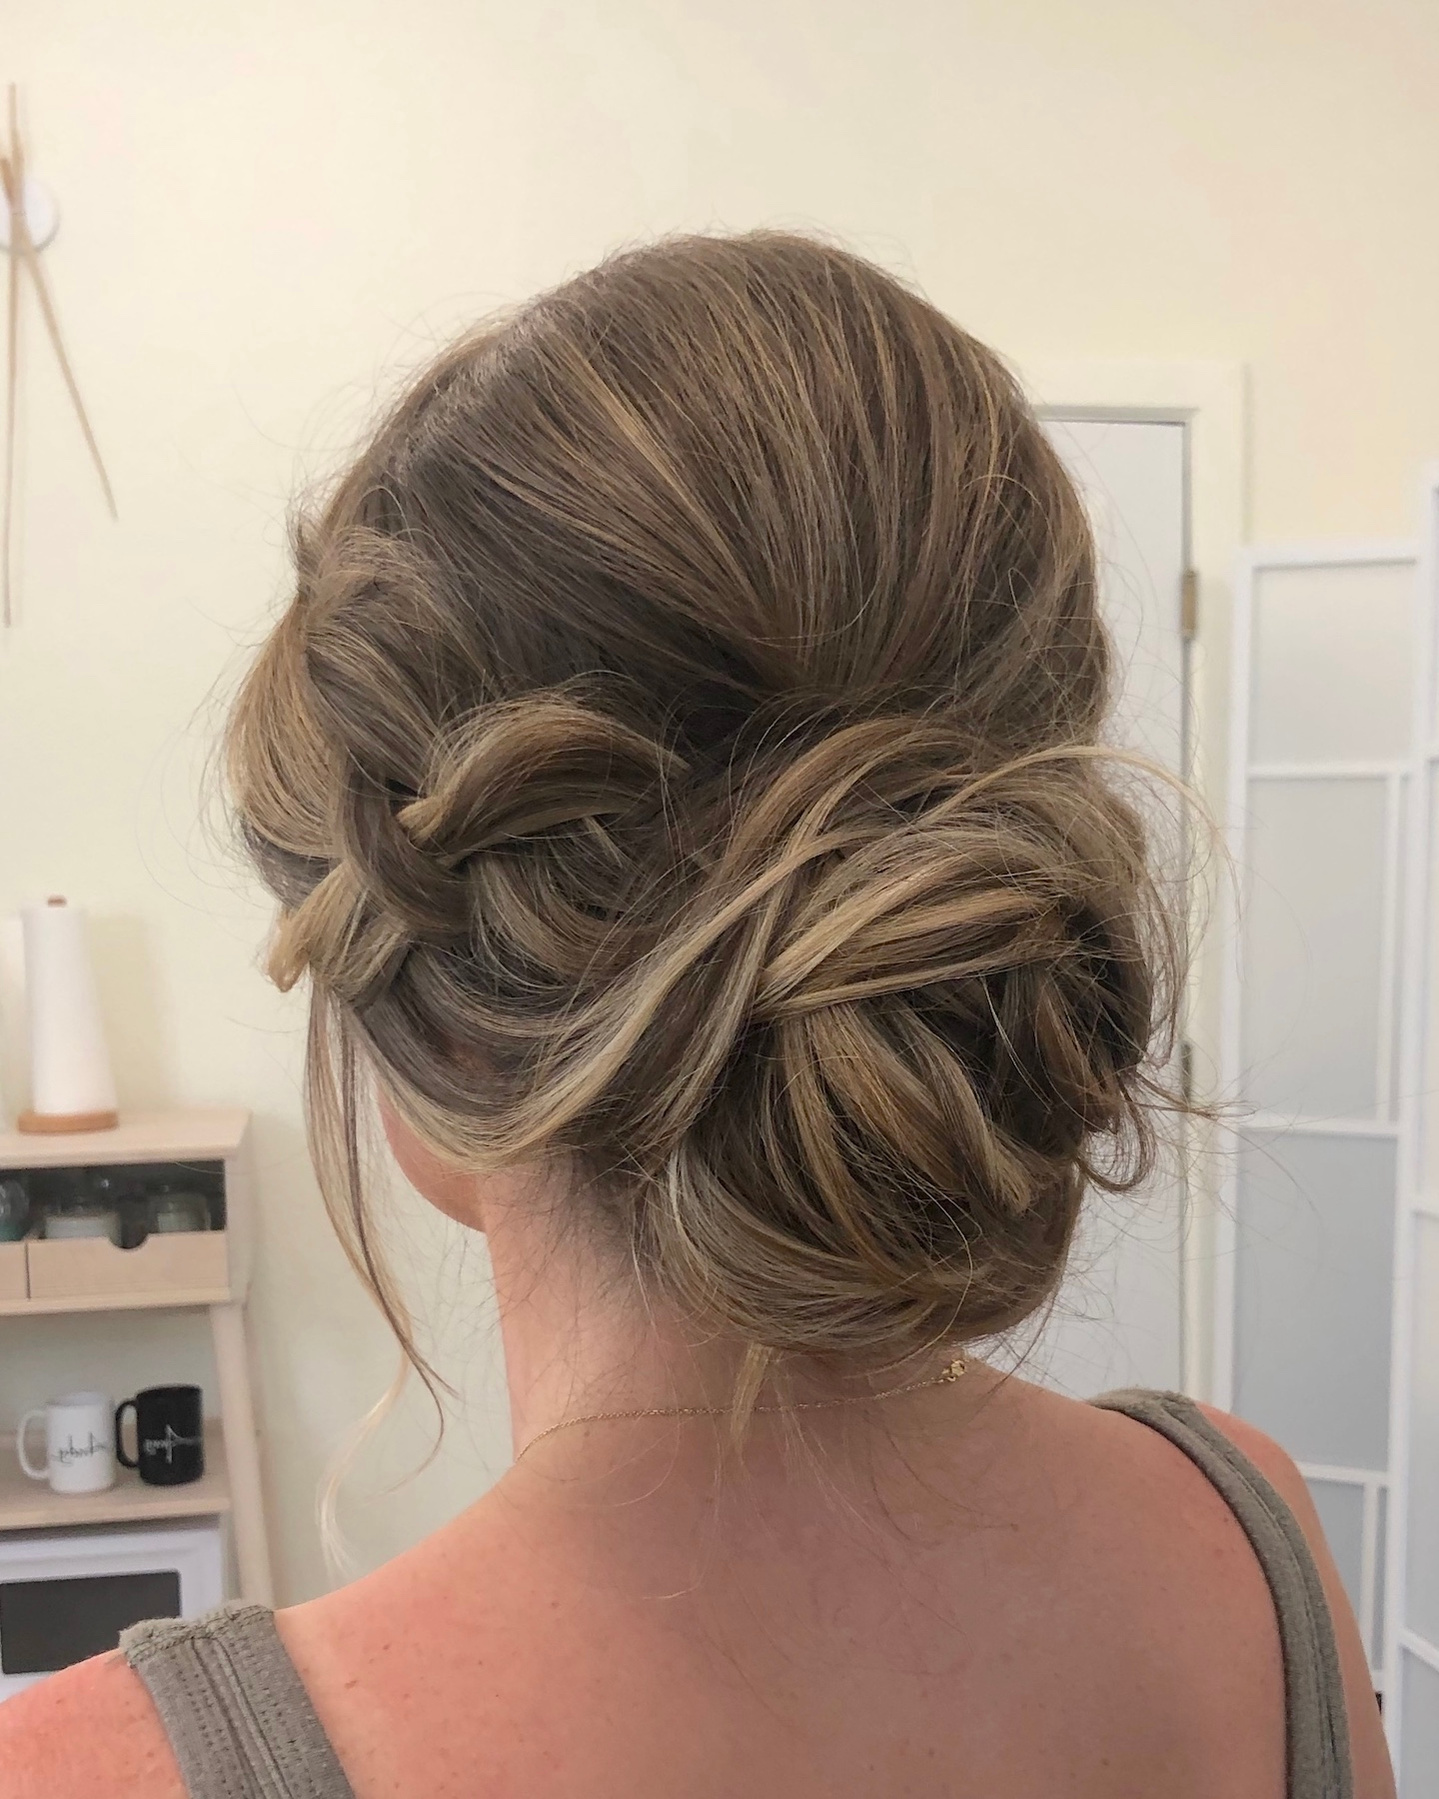 soft updo braid on the side